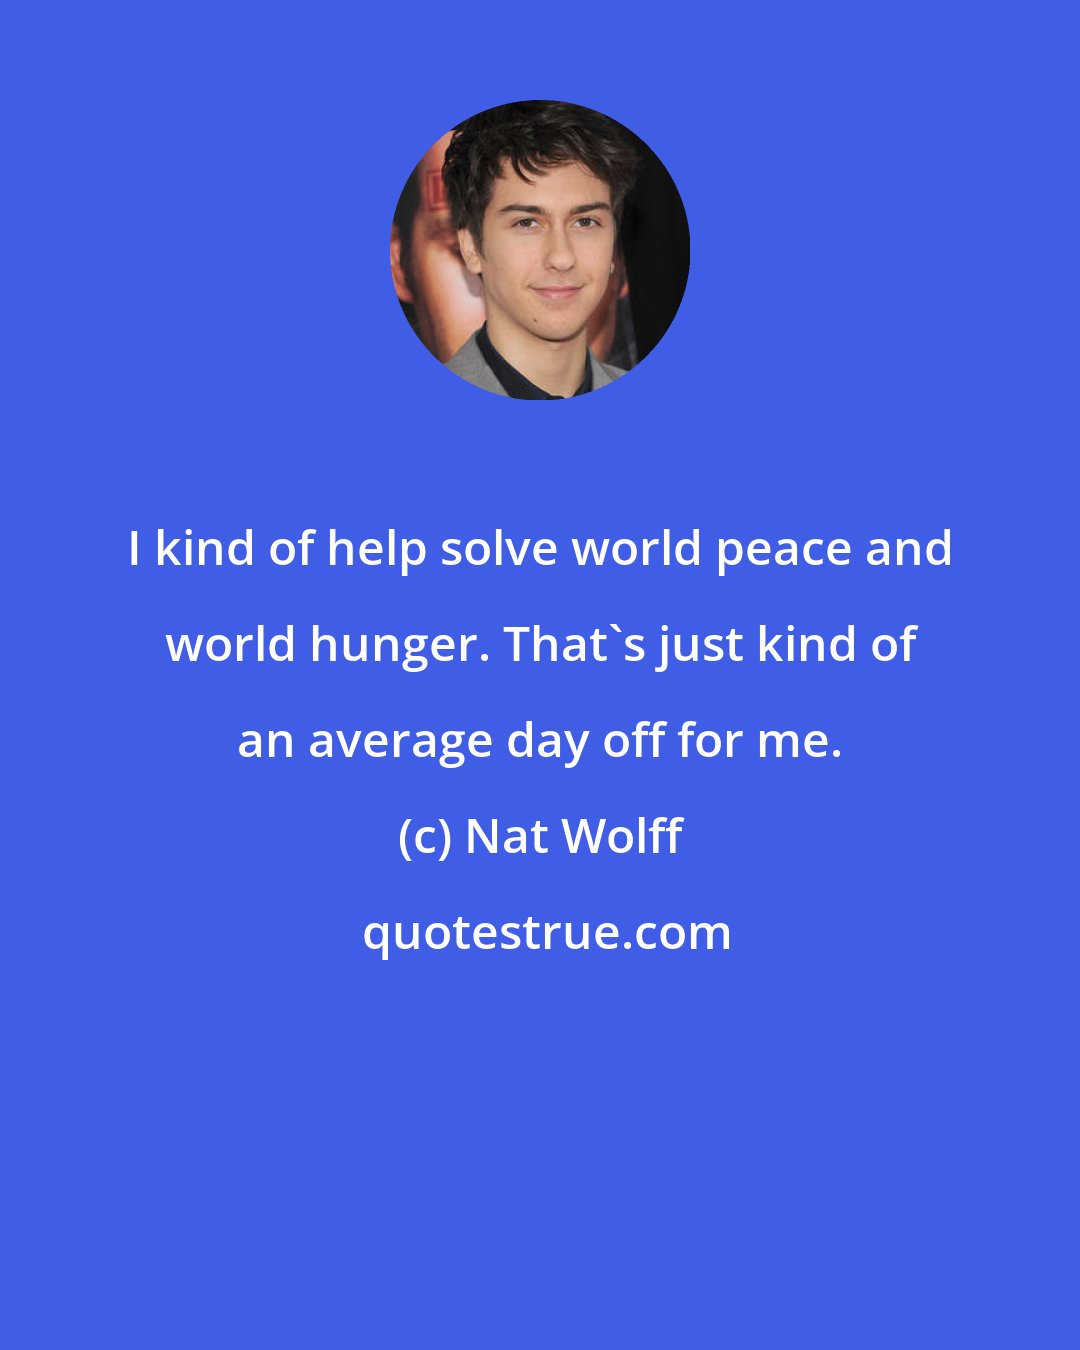 Nat Wolff: I kind of help solve world peace and world hunger. That's just kind of an average day off for me.